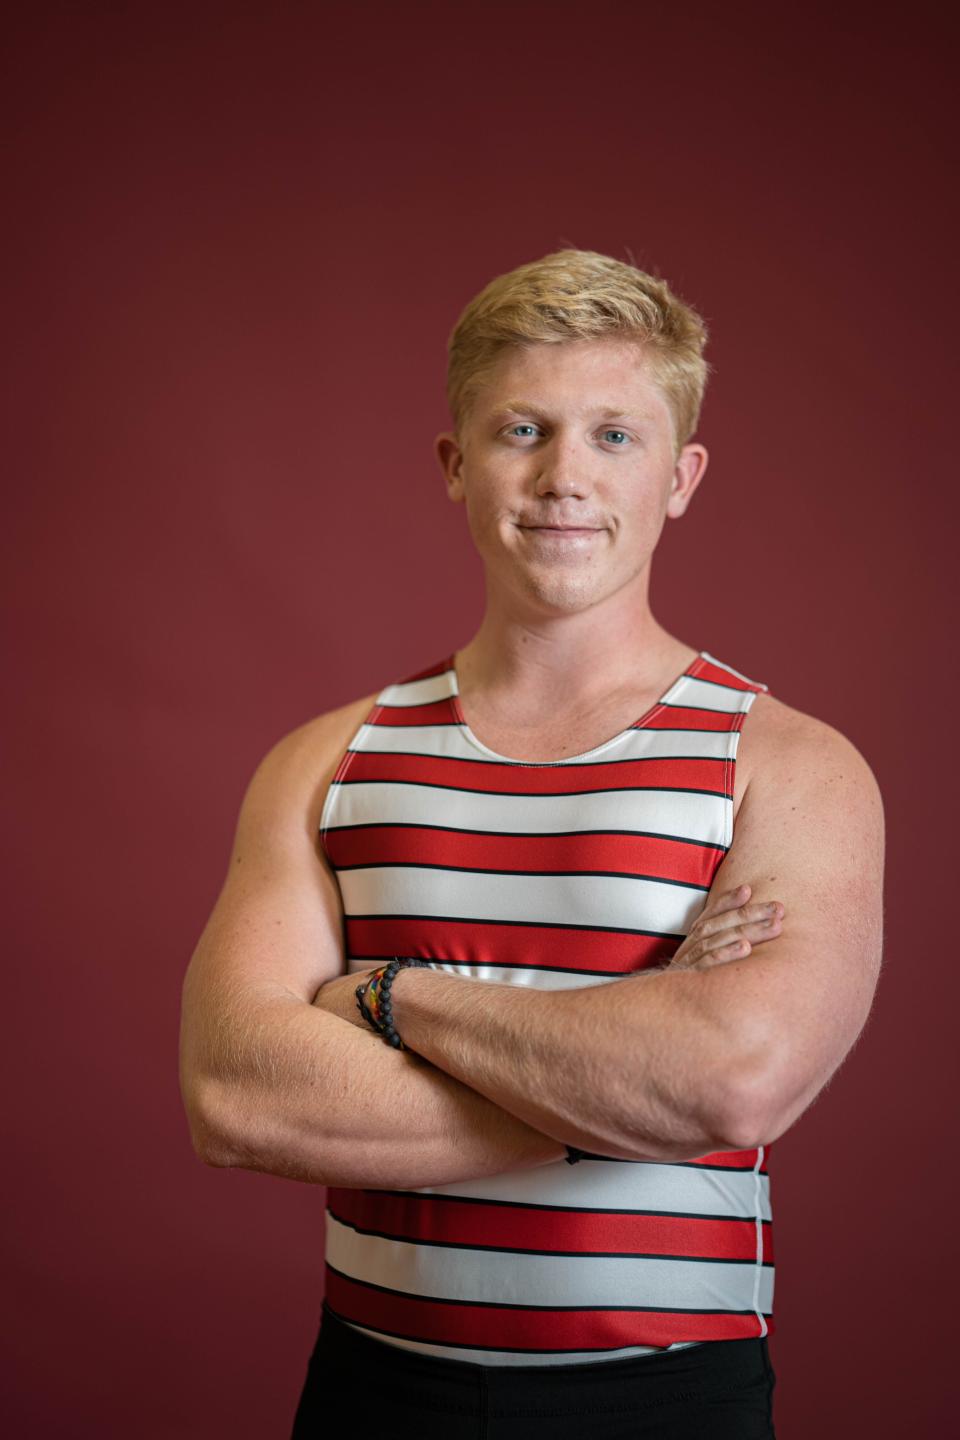 On June 23, Florida Tech athletic officials shared this portrait of senior rower Mason Yaskovic on social media in a Scholar-Athlete Spotlight. Five days later, they informed him via email that the varsity men's rowing program had been discontinued.